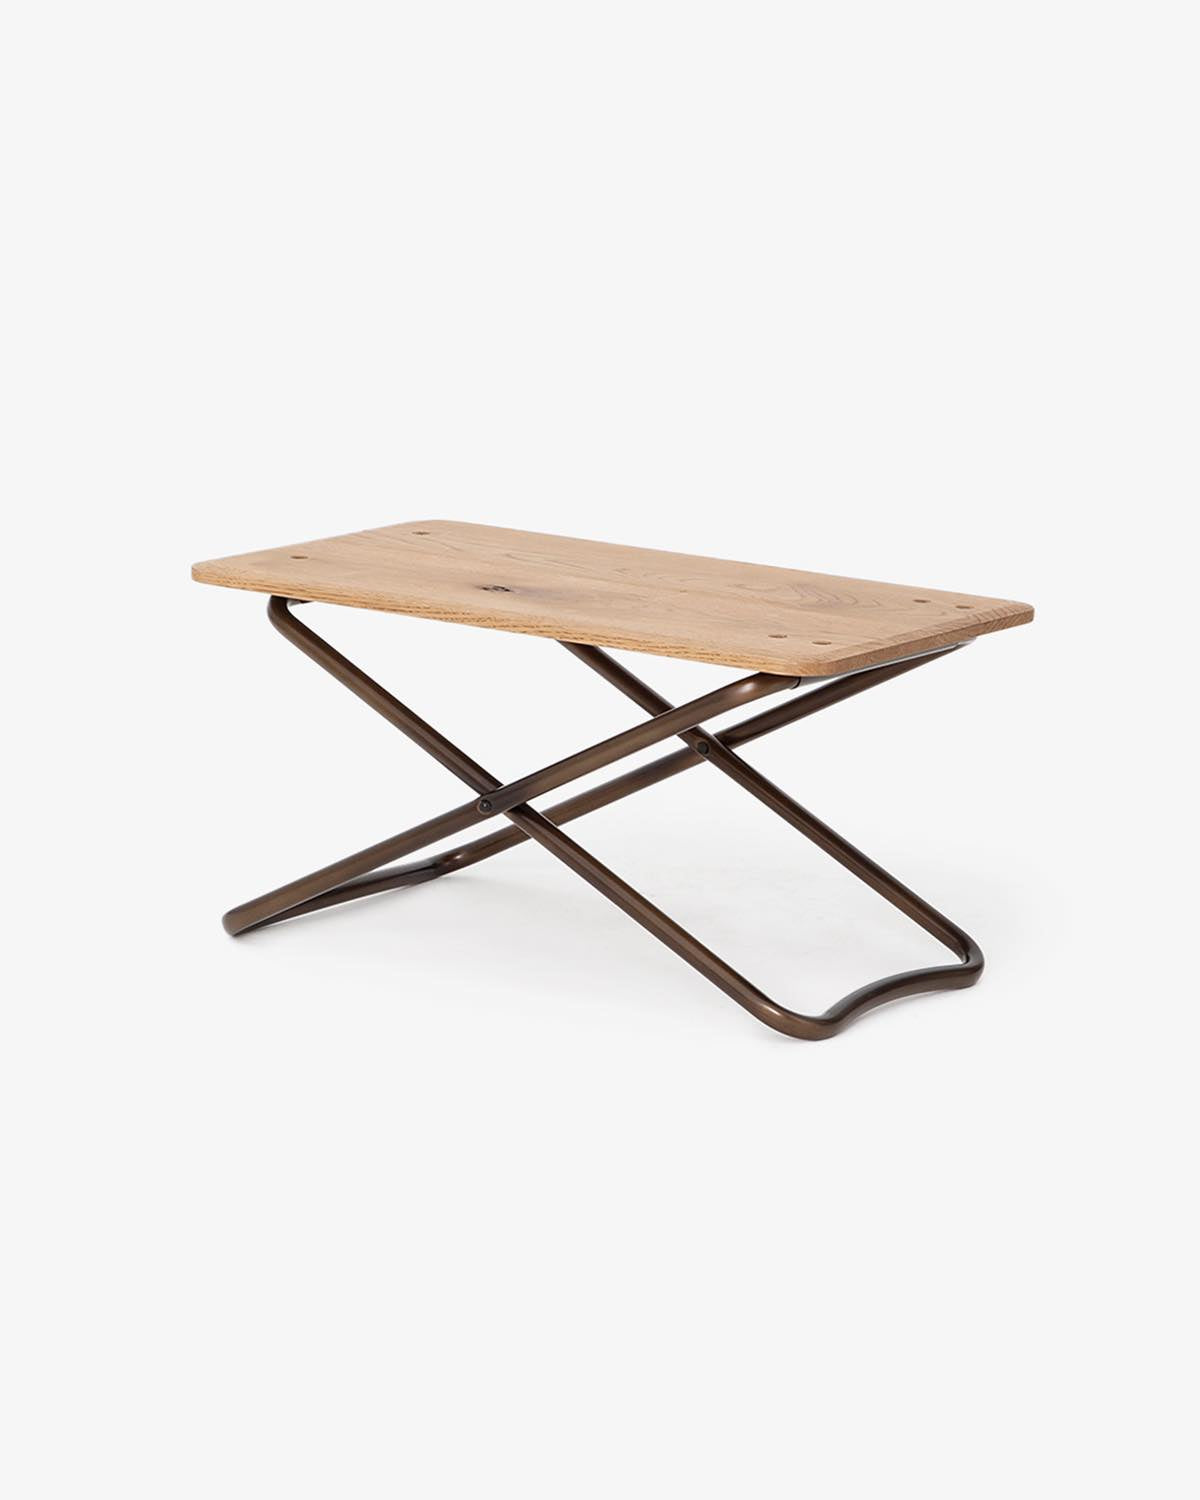 × TRUCK FURNITURE WOOD FOLDING LOW TABLE S